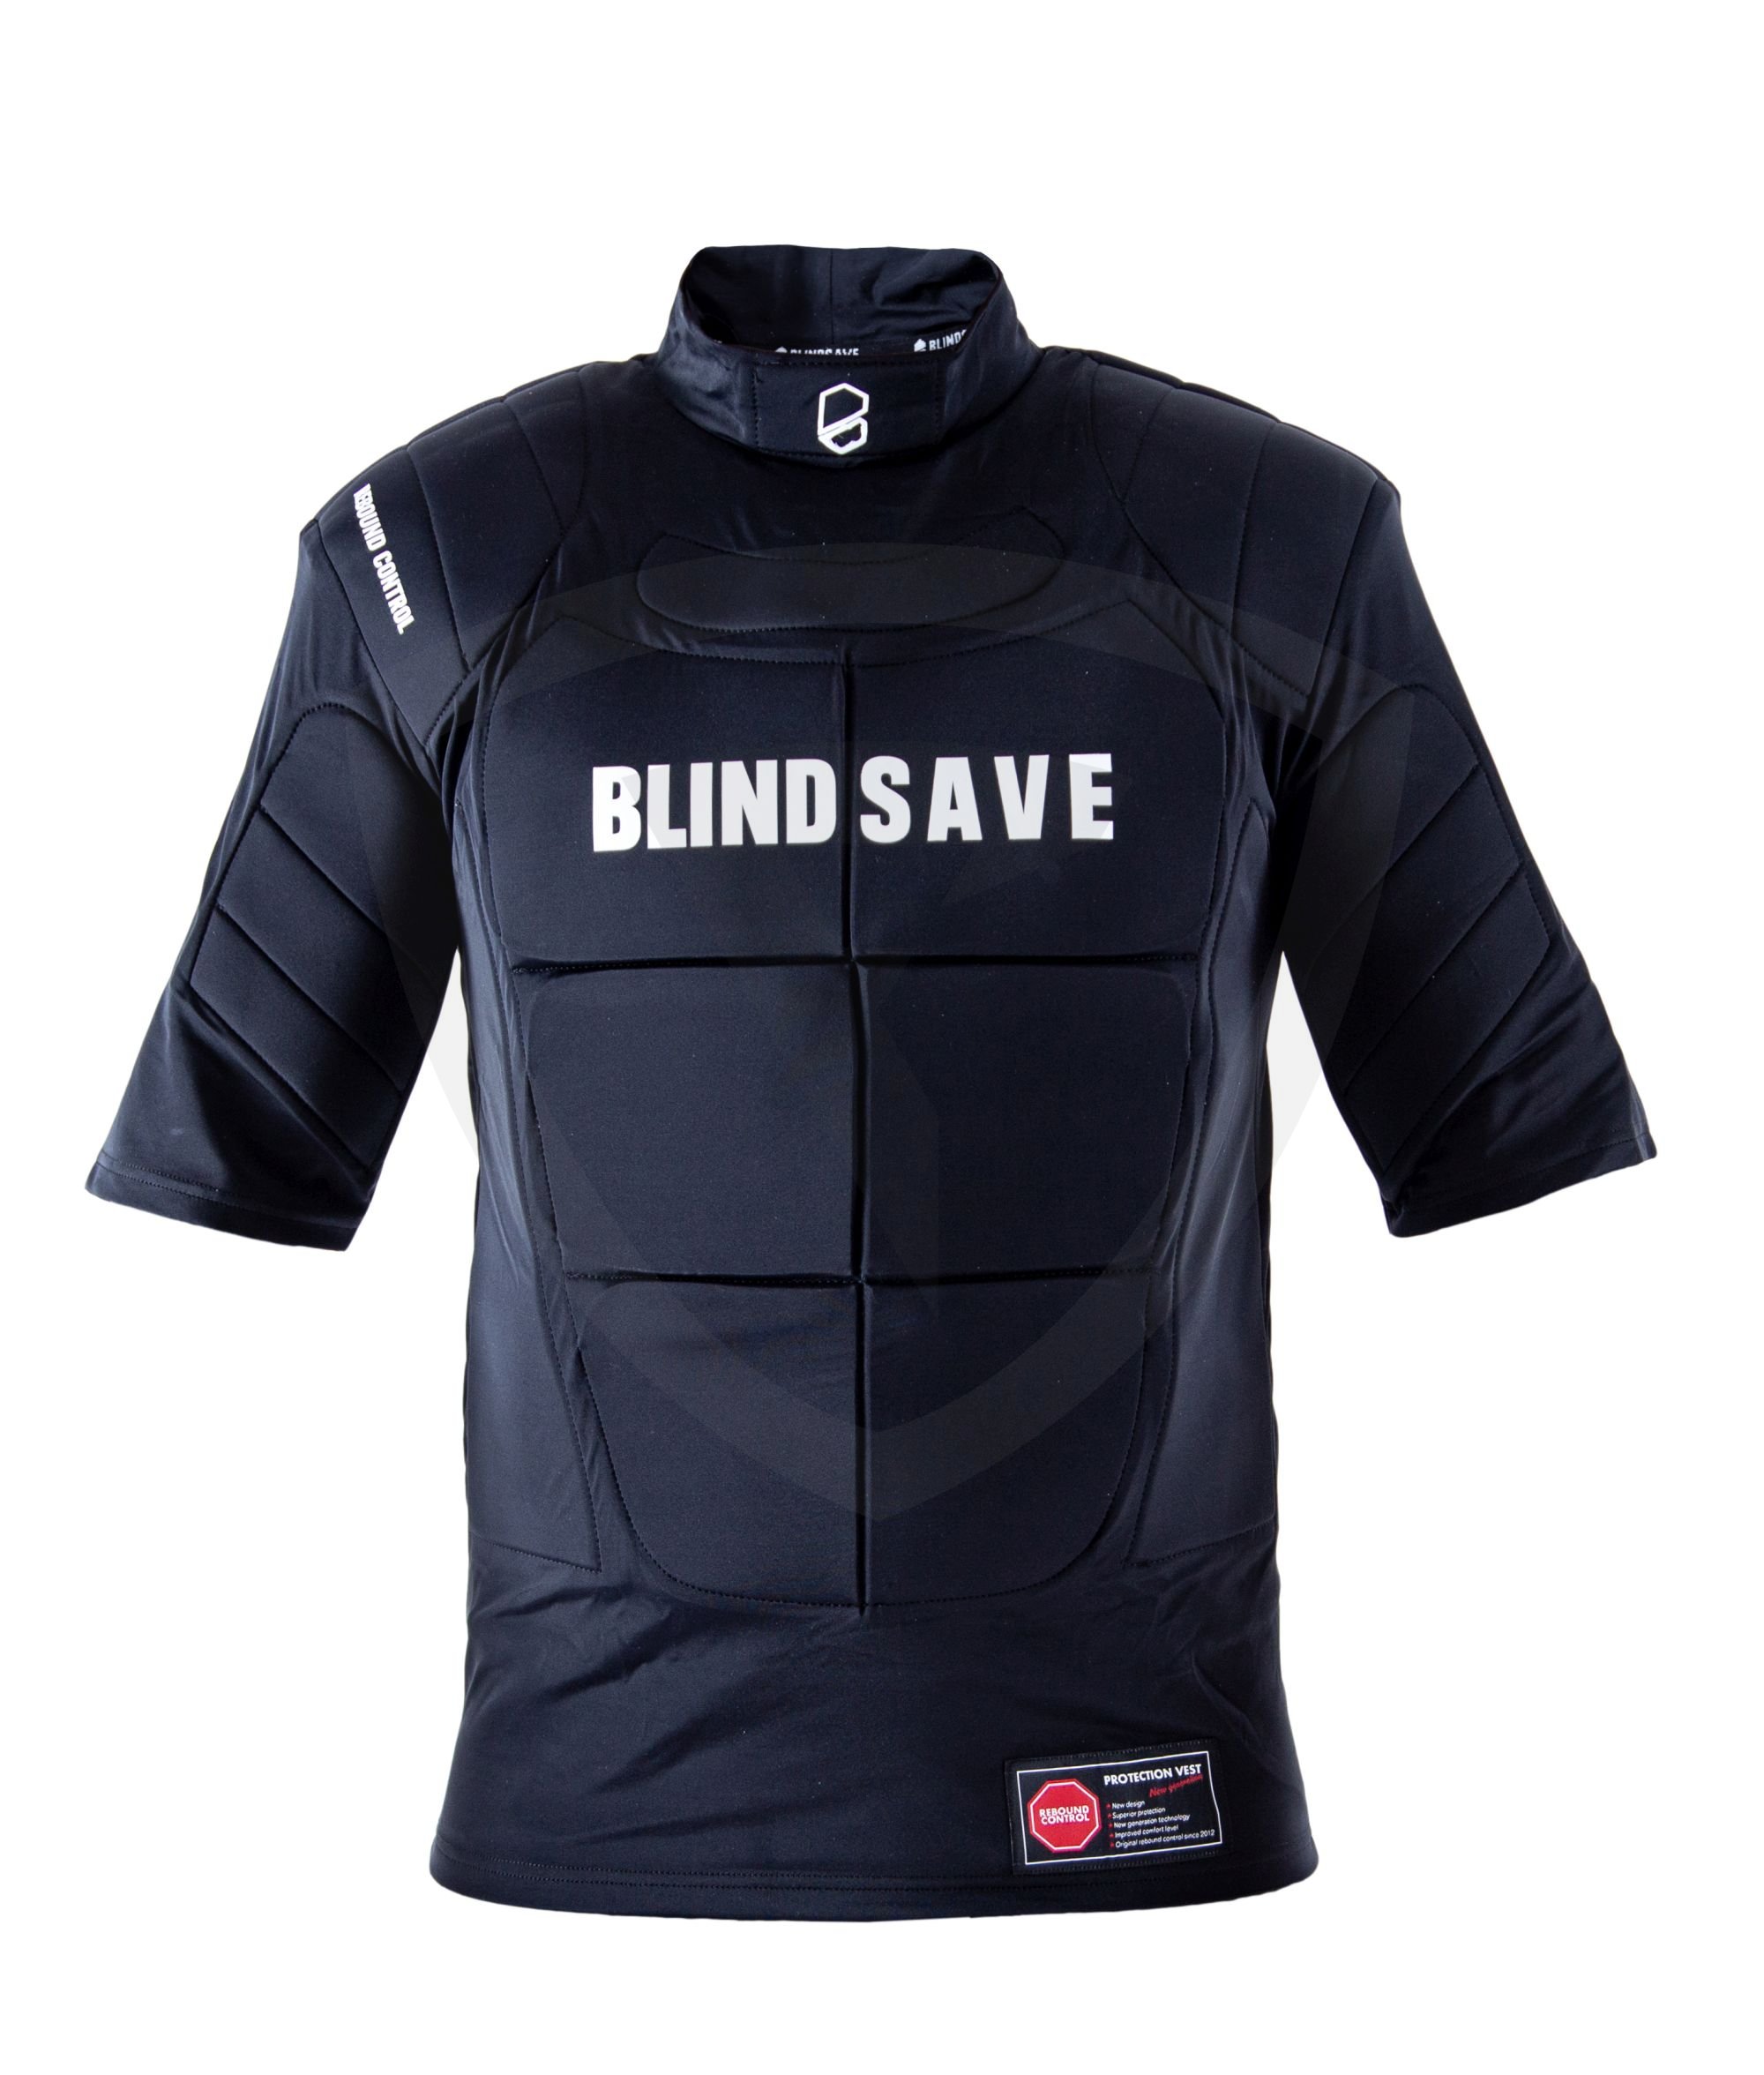 Blindsave NEW Protection vest SS Rebound Control XL